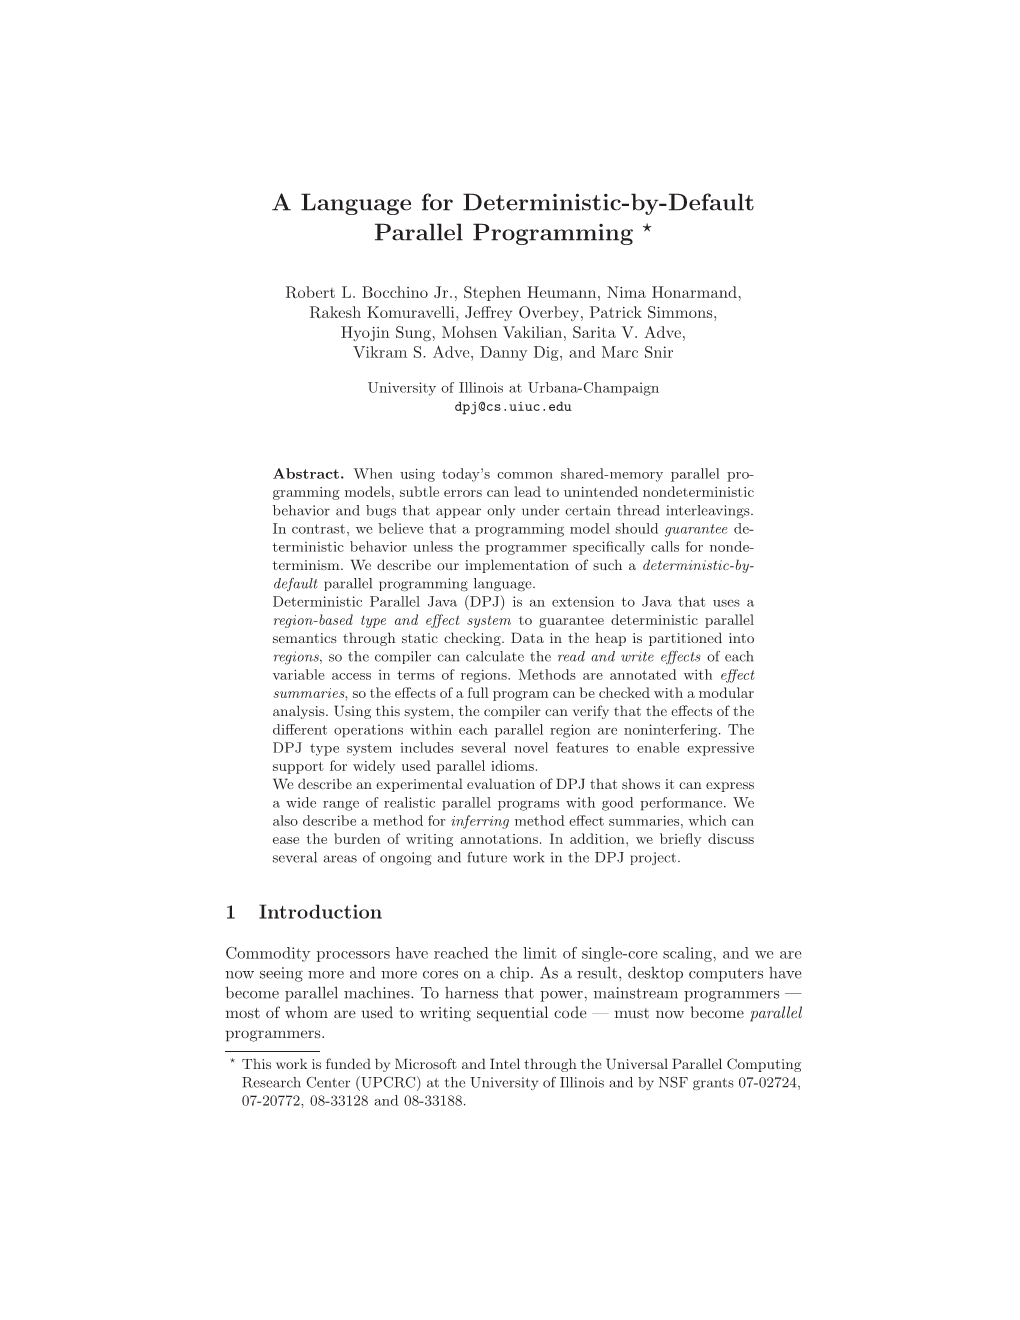 A Language for Deterministic-By-Default Parallel Programming ⋆